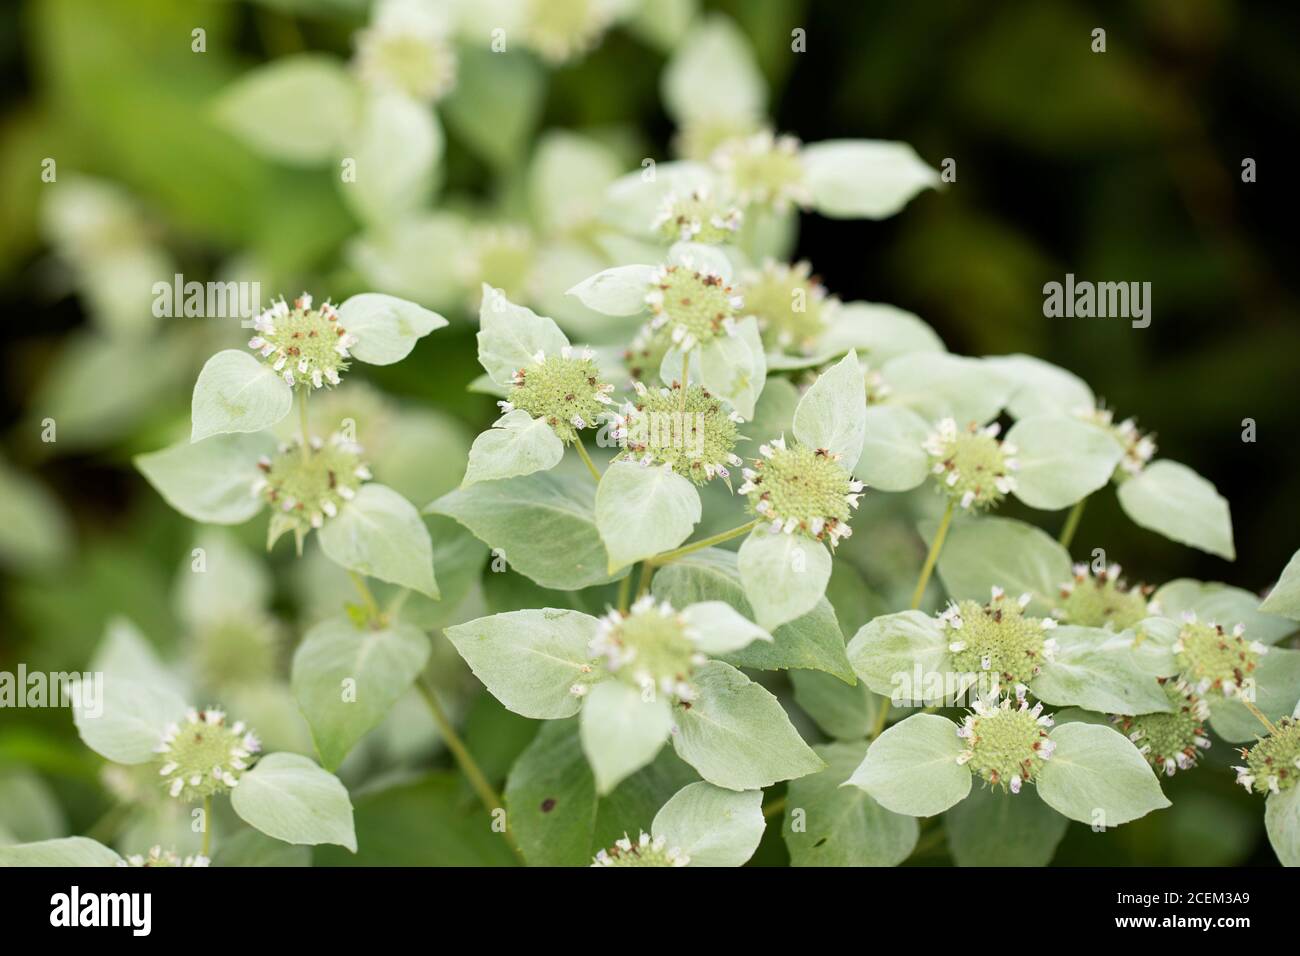 Clustered mountainmint (Pycnanthemum muticum) also known as short-toothed mountain mint, in family Lamiaceae, growing in Acton, Massachusetts, USA. Stock Photo